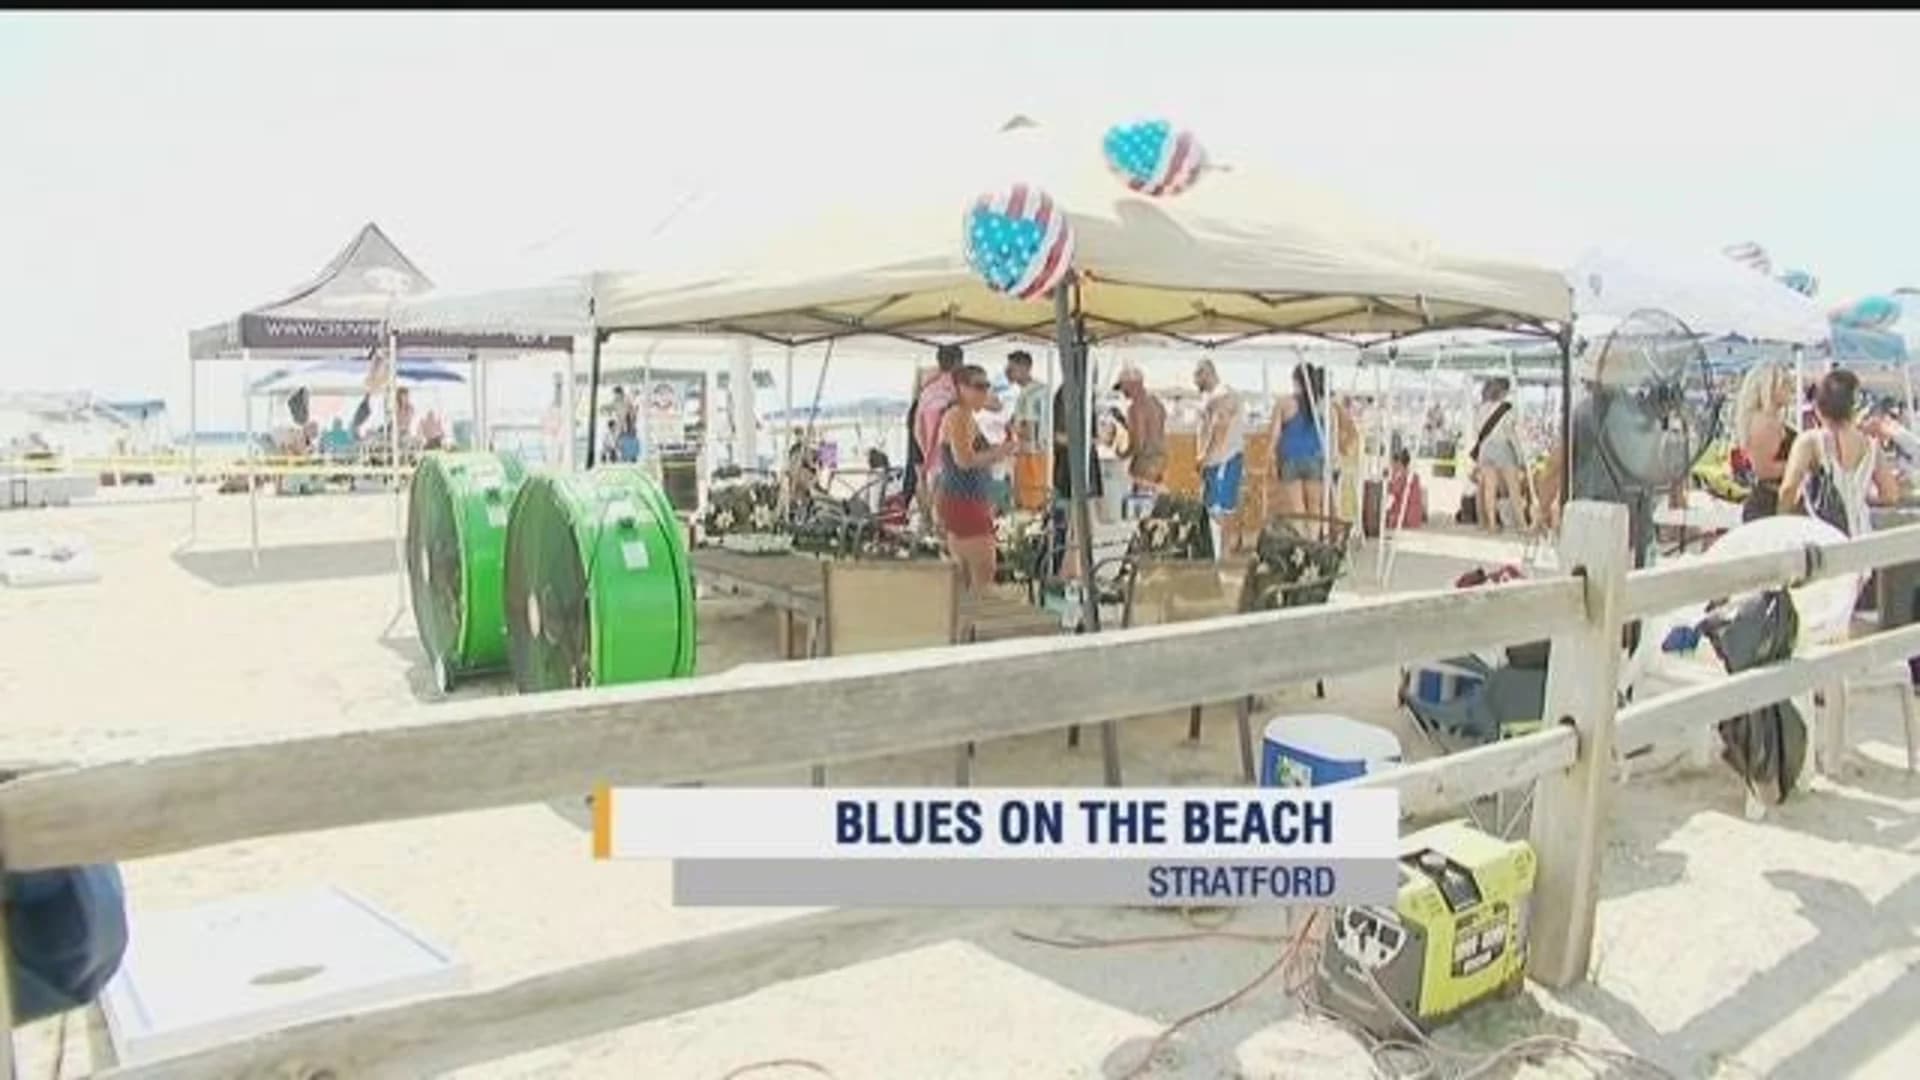 Thousands gather for Blues on the Beach music festival in Stratford